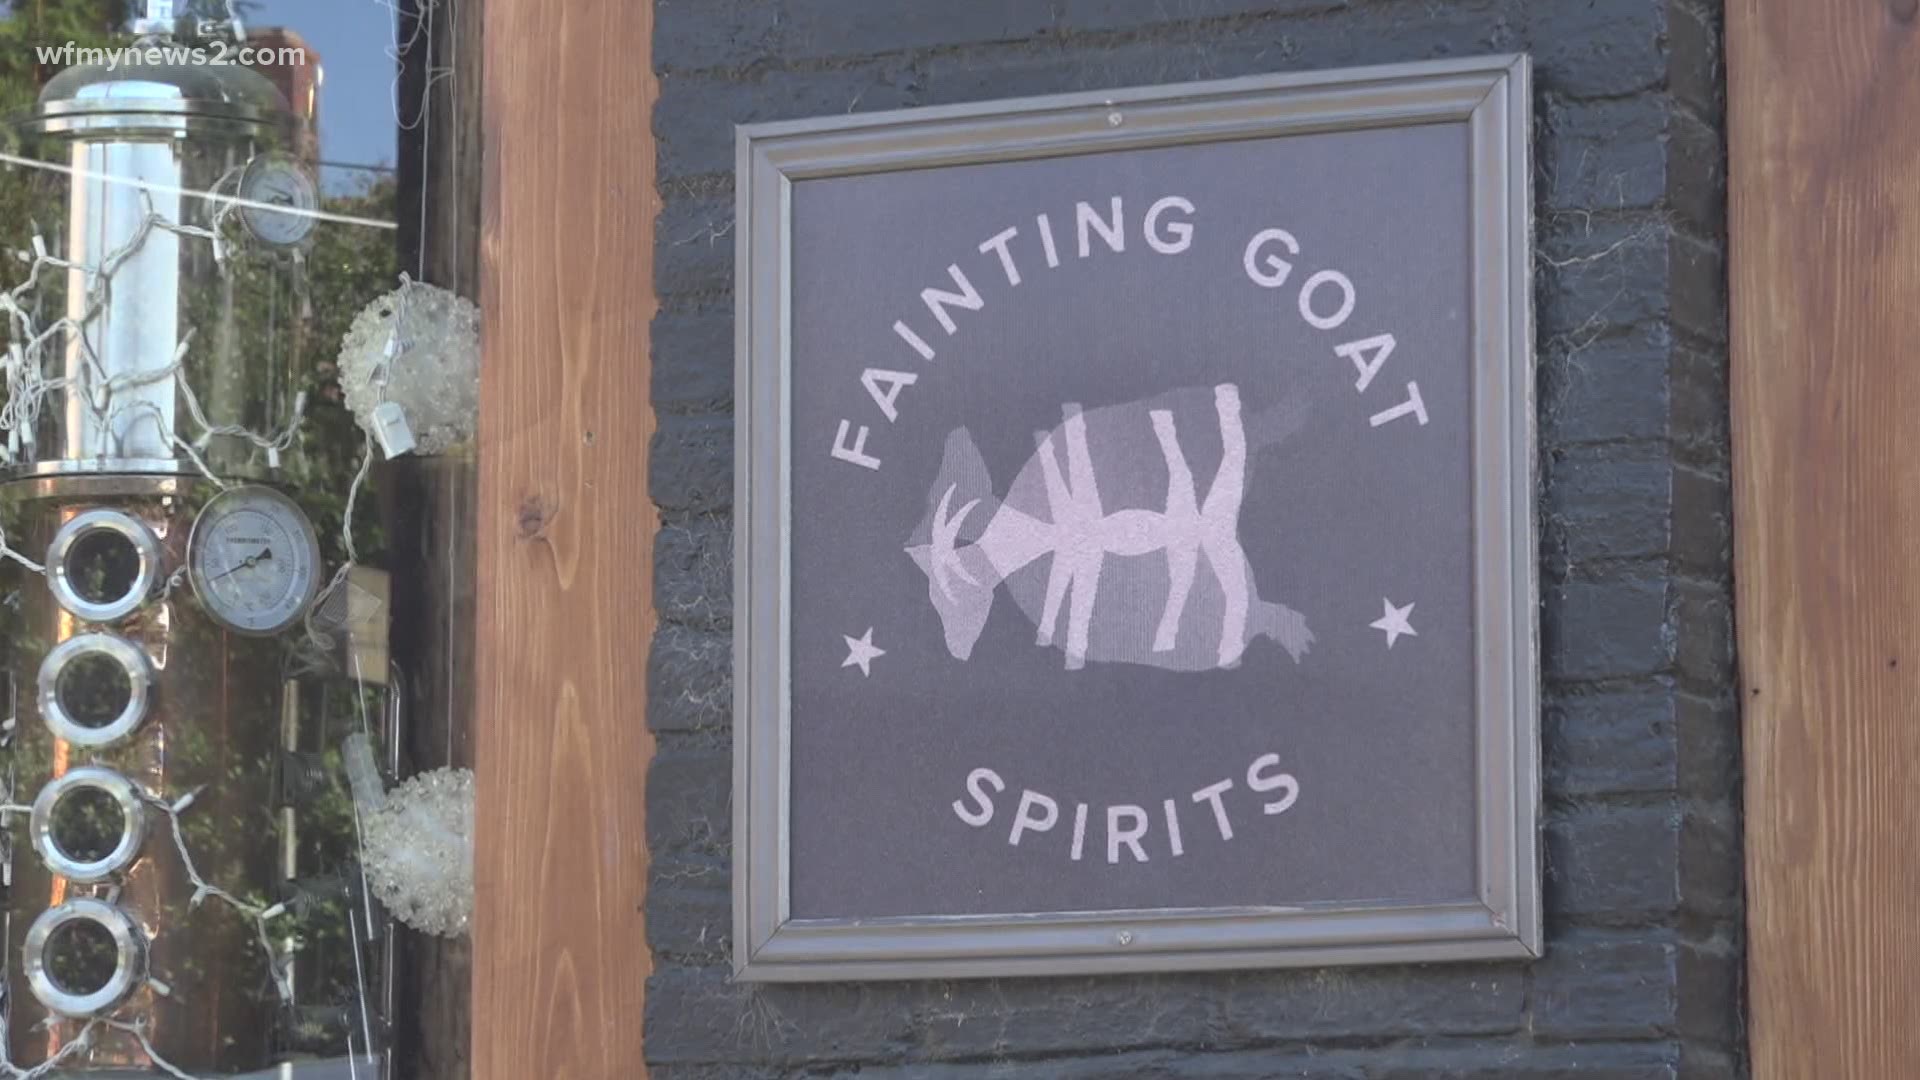 Fainting Goat Spirits had to jump through hoops to get items that are normally easy to obtain in their line of work.